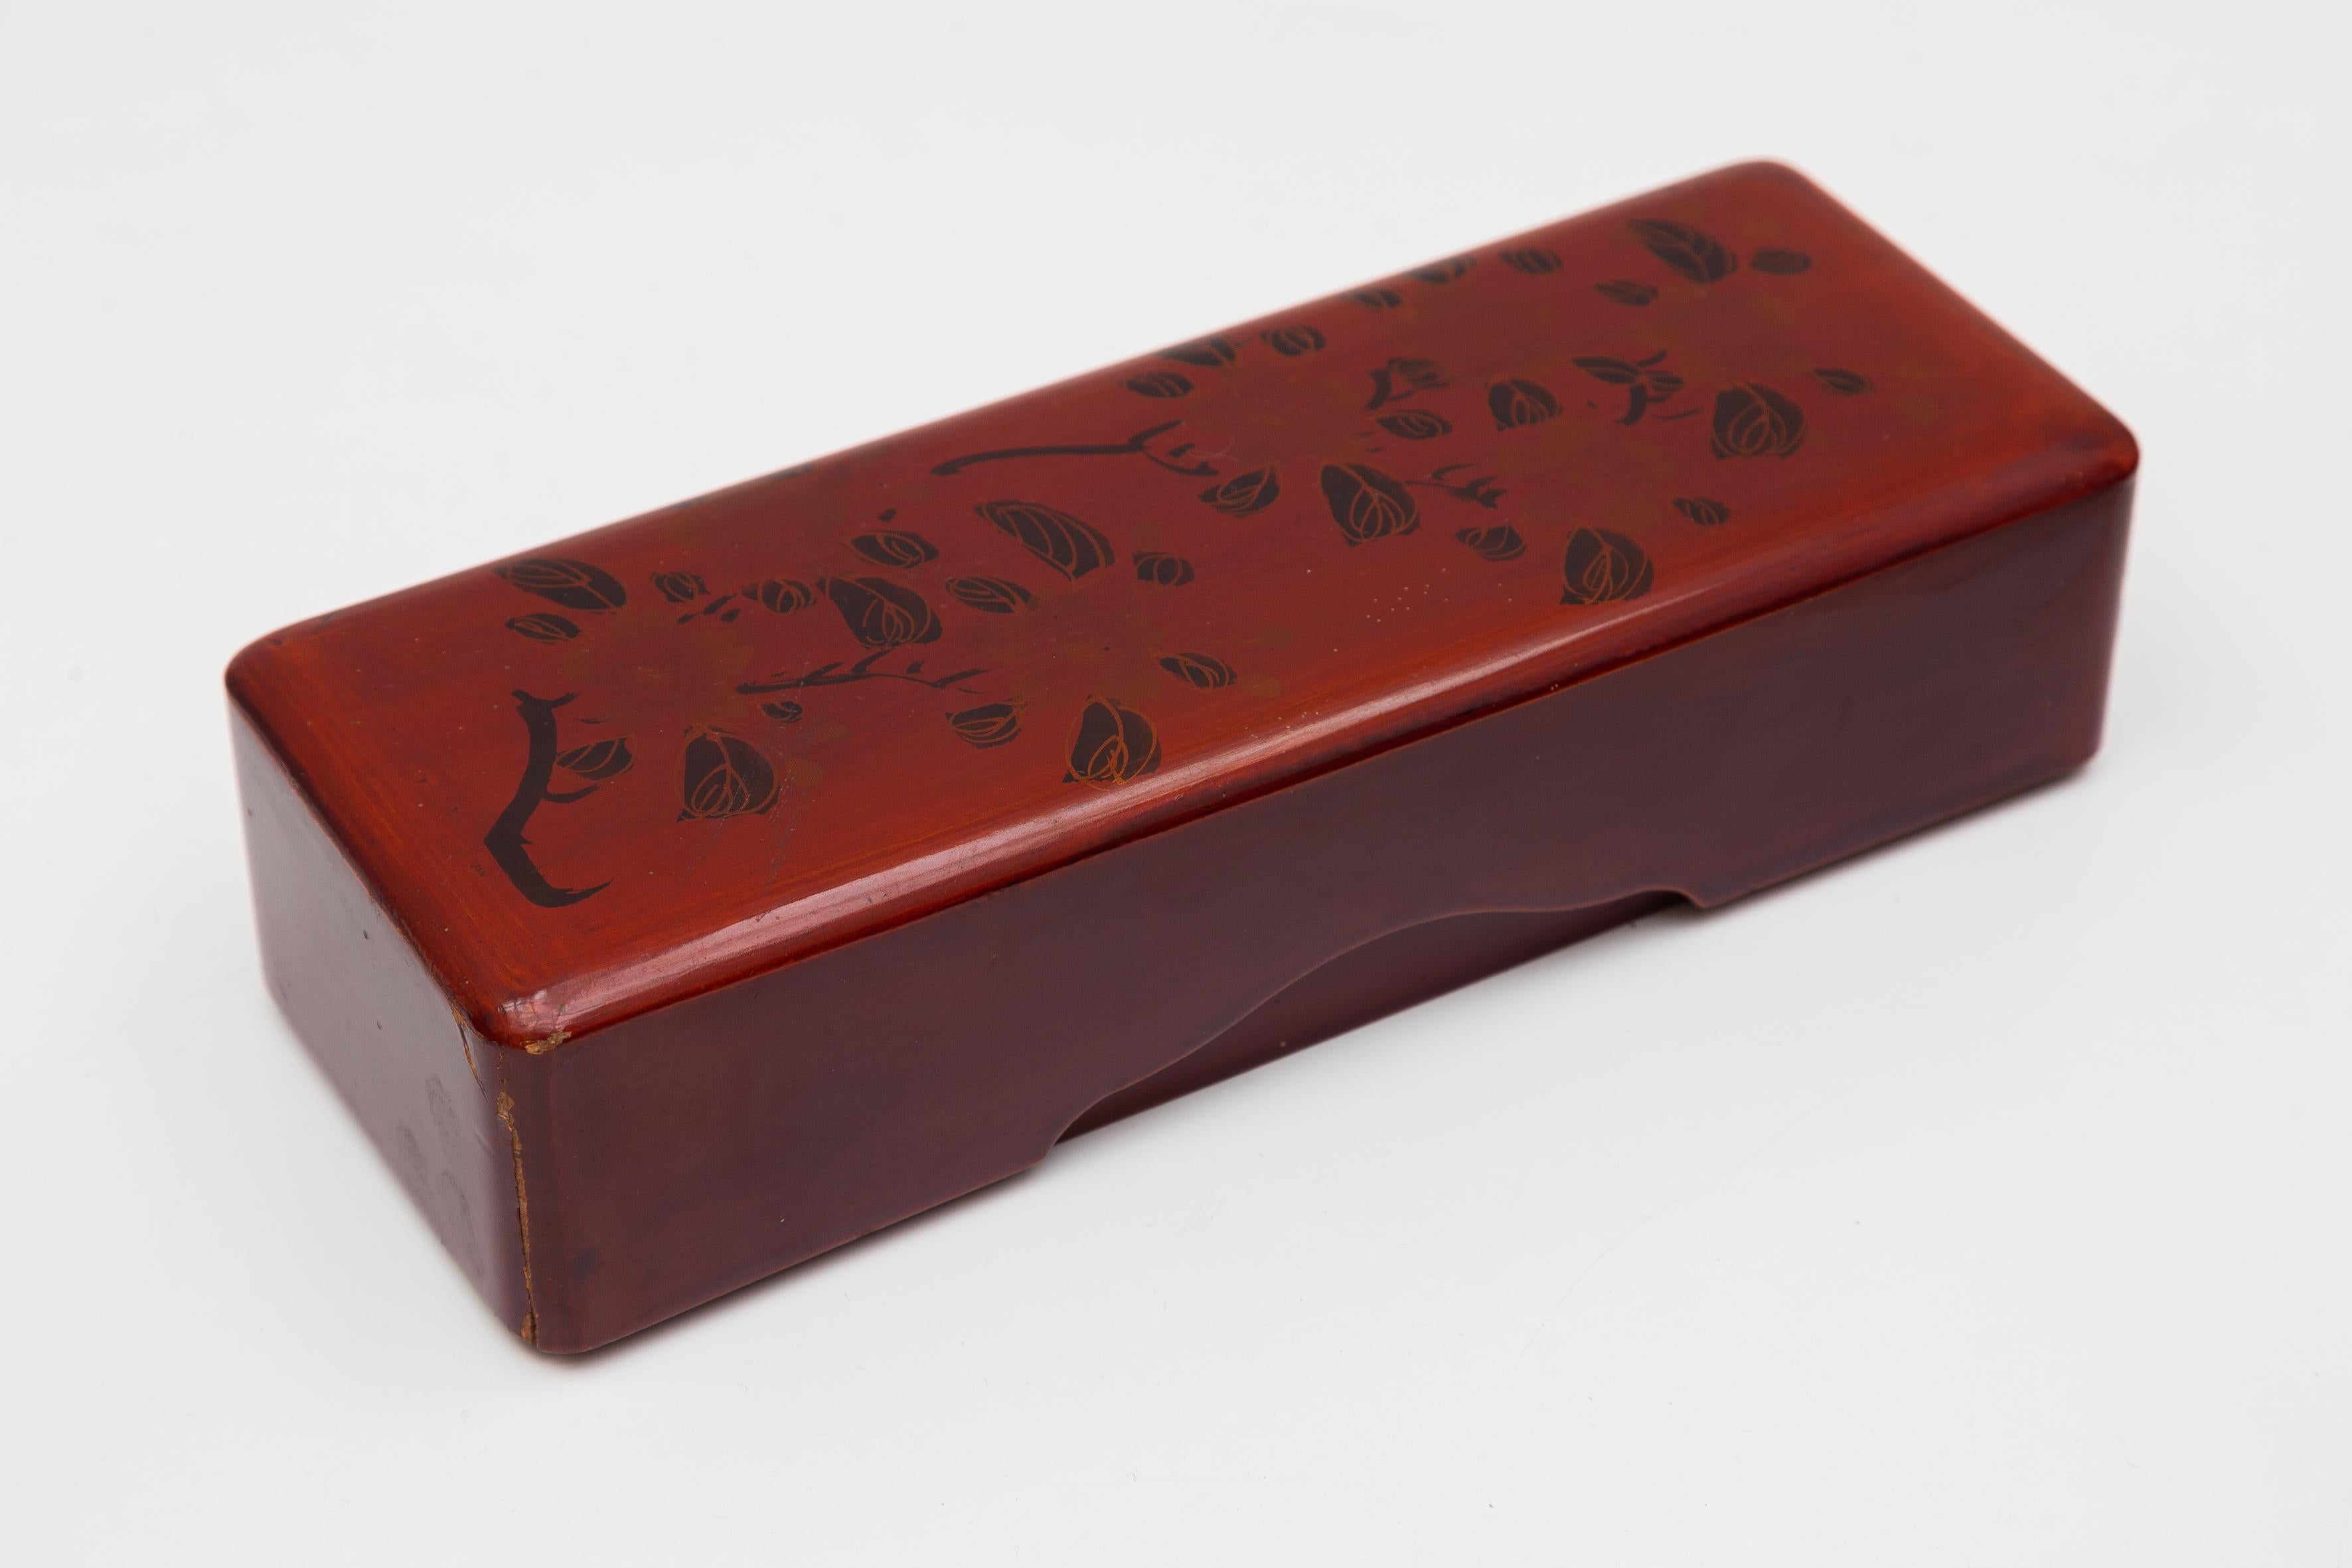 Hand-Painted Japanese Lacquered Boxes Collection, Wunderkammer Objects